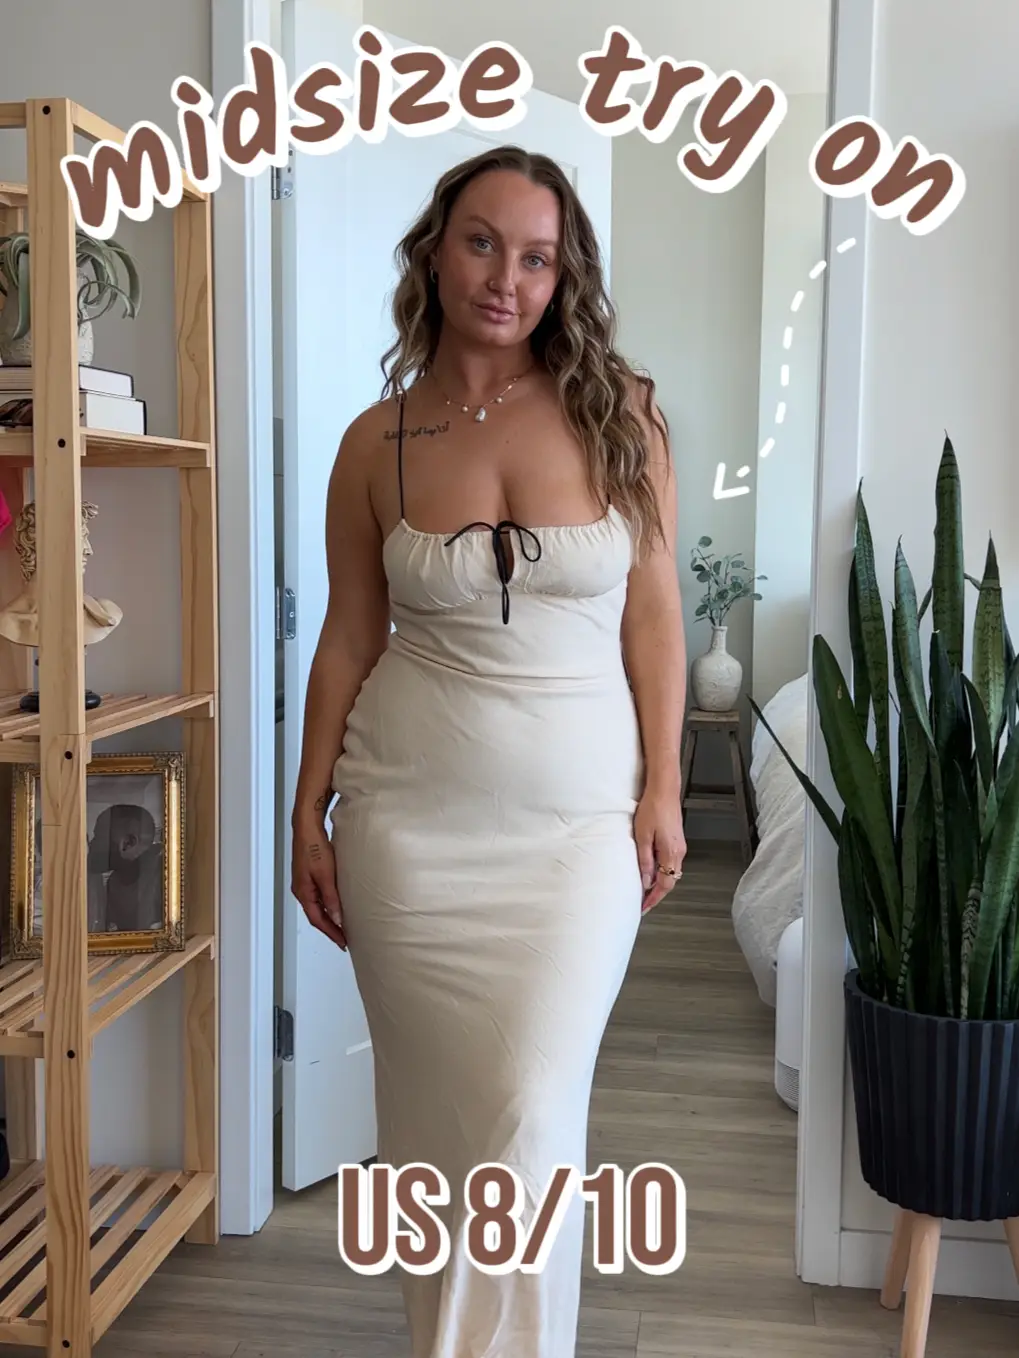 I'm midsize and found the most flattering dresses for my body type